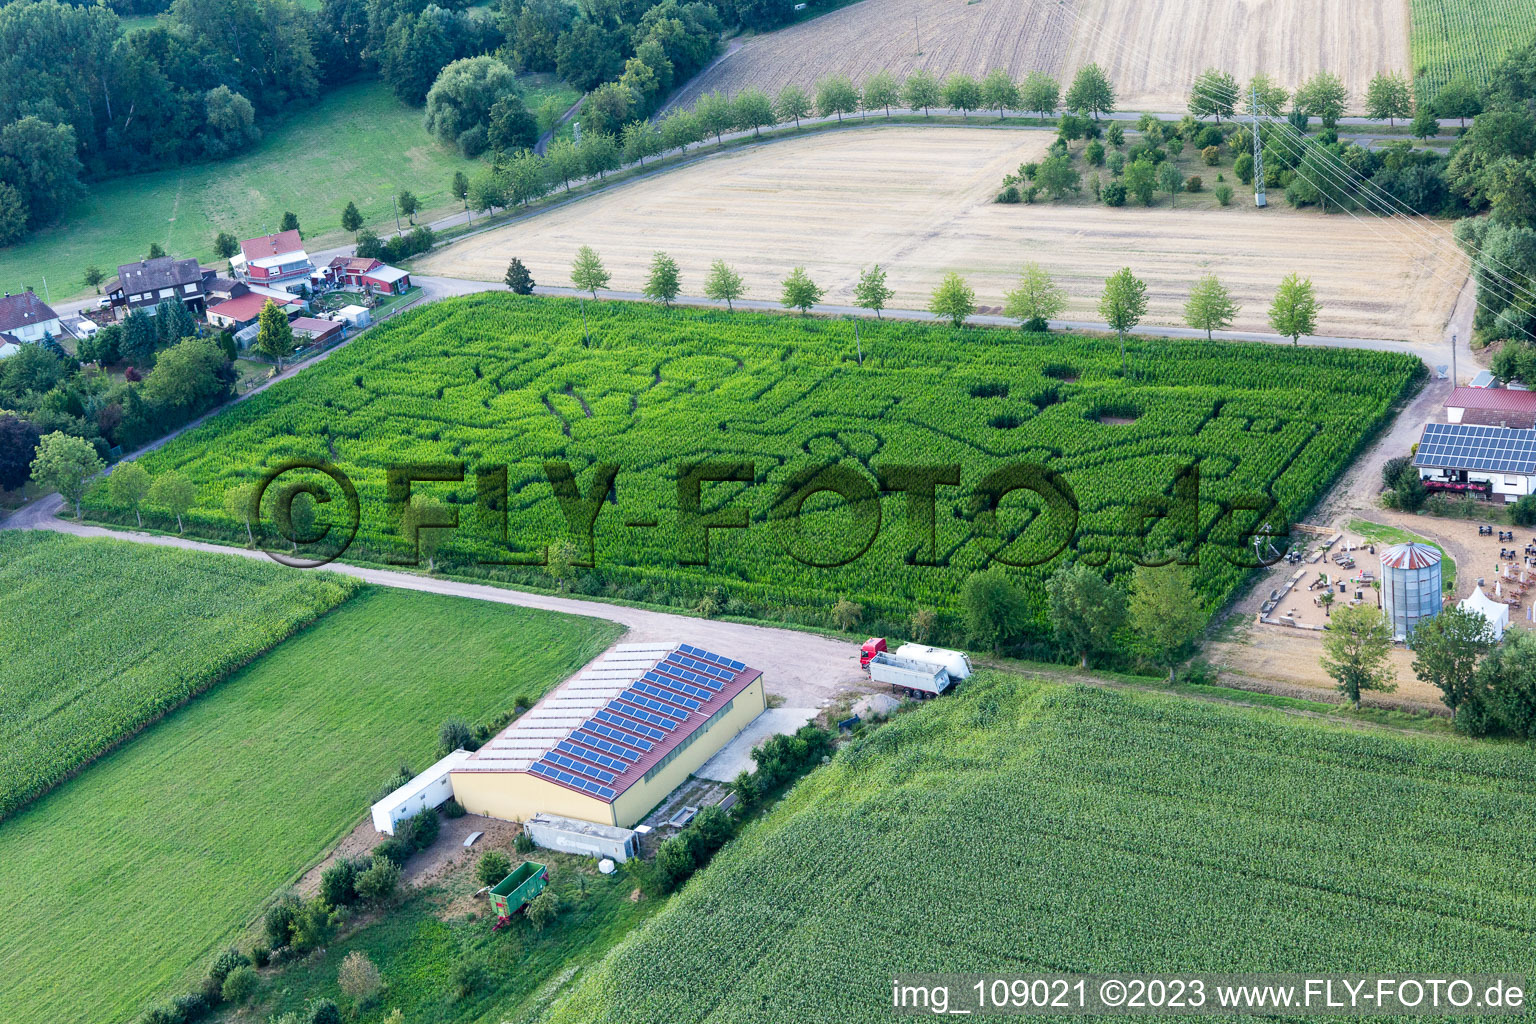 Aerial photograpy of Corn maze at Seehof in Steinweiler in the state Rhineland-Palatinate, Germany